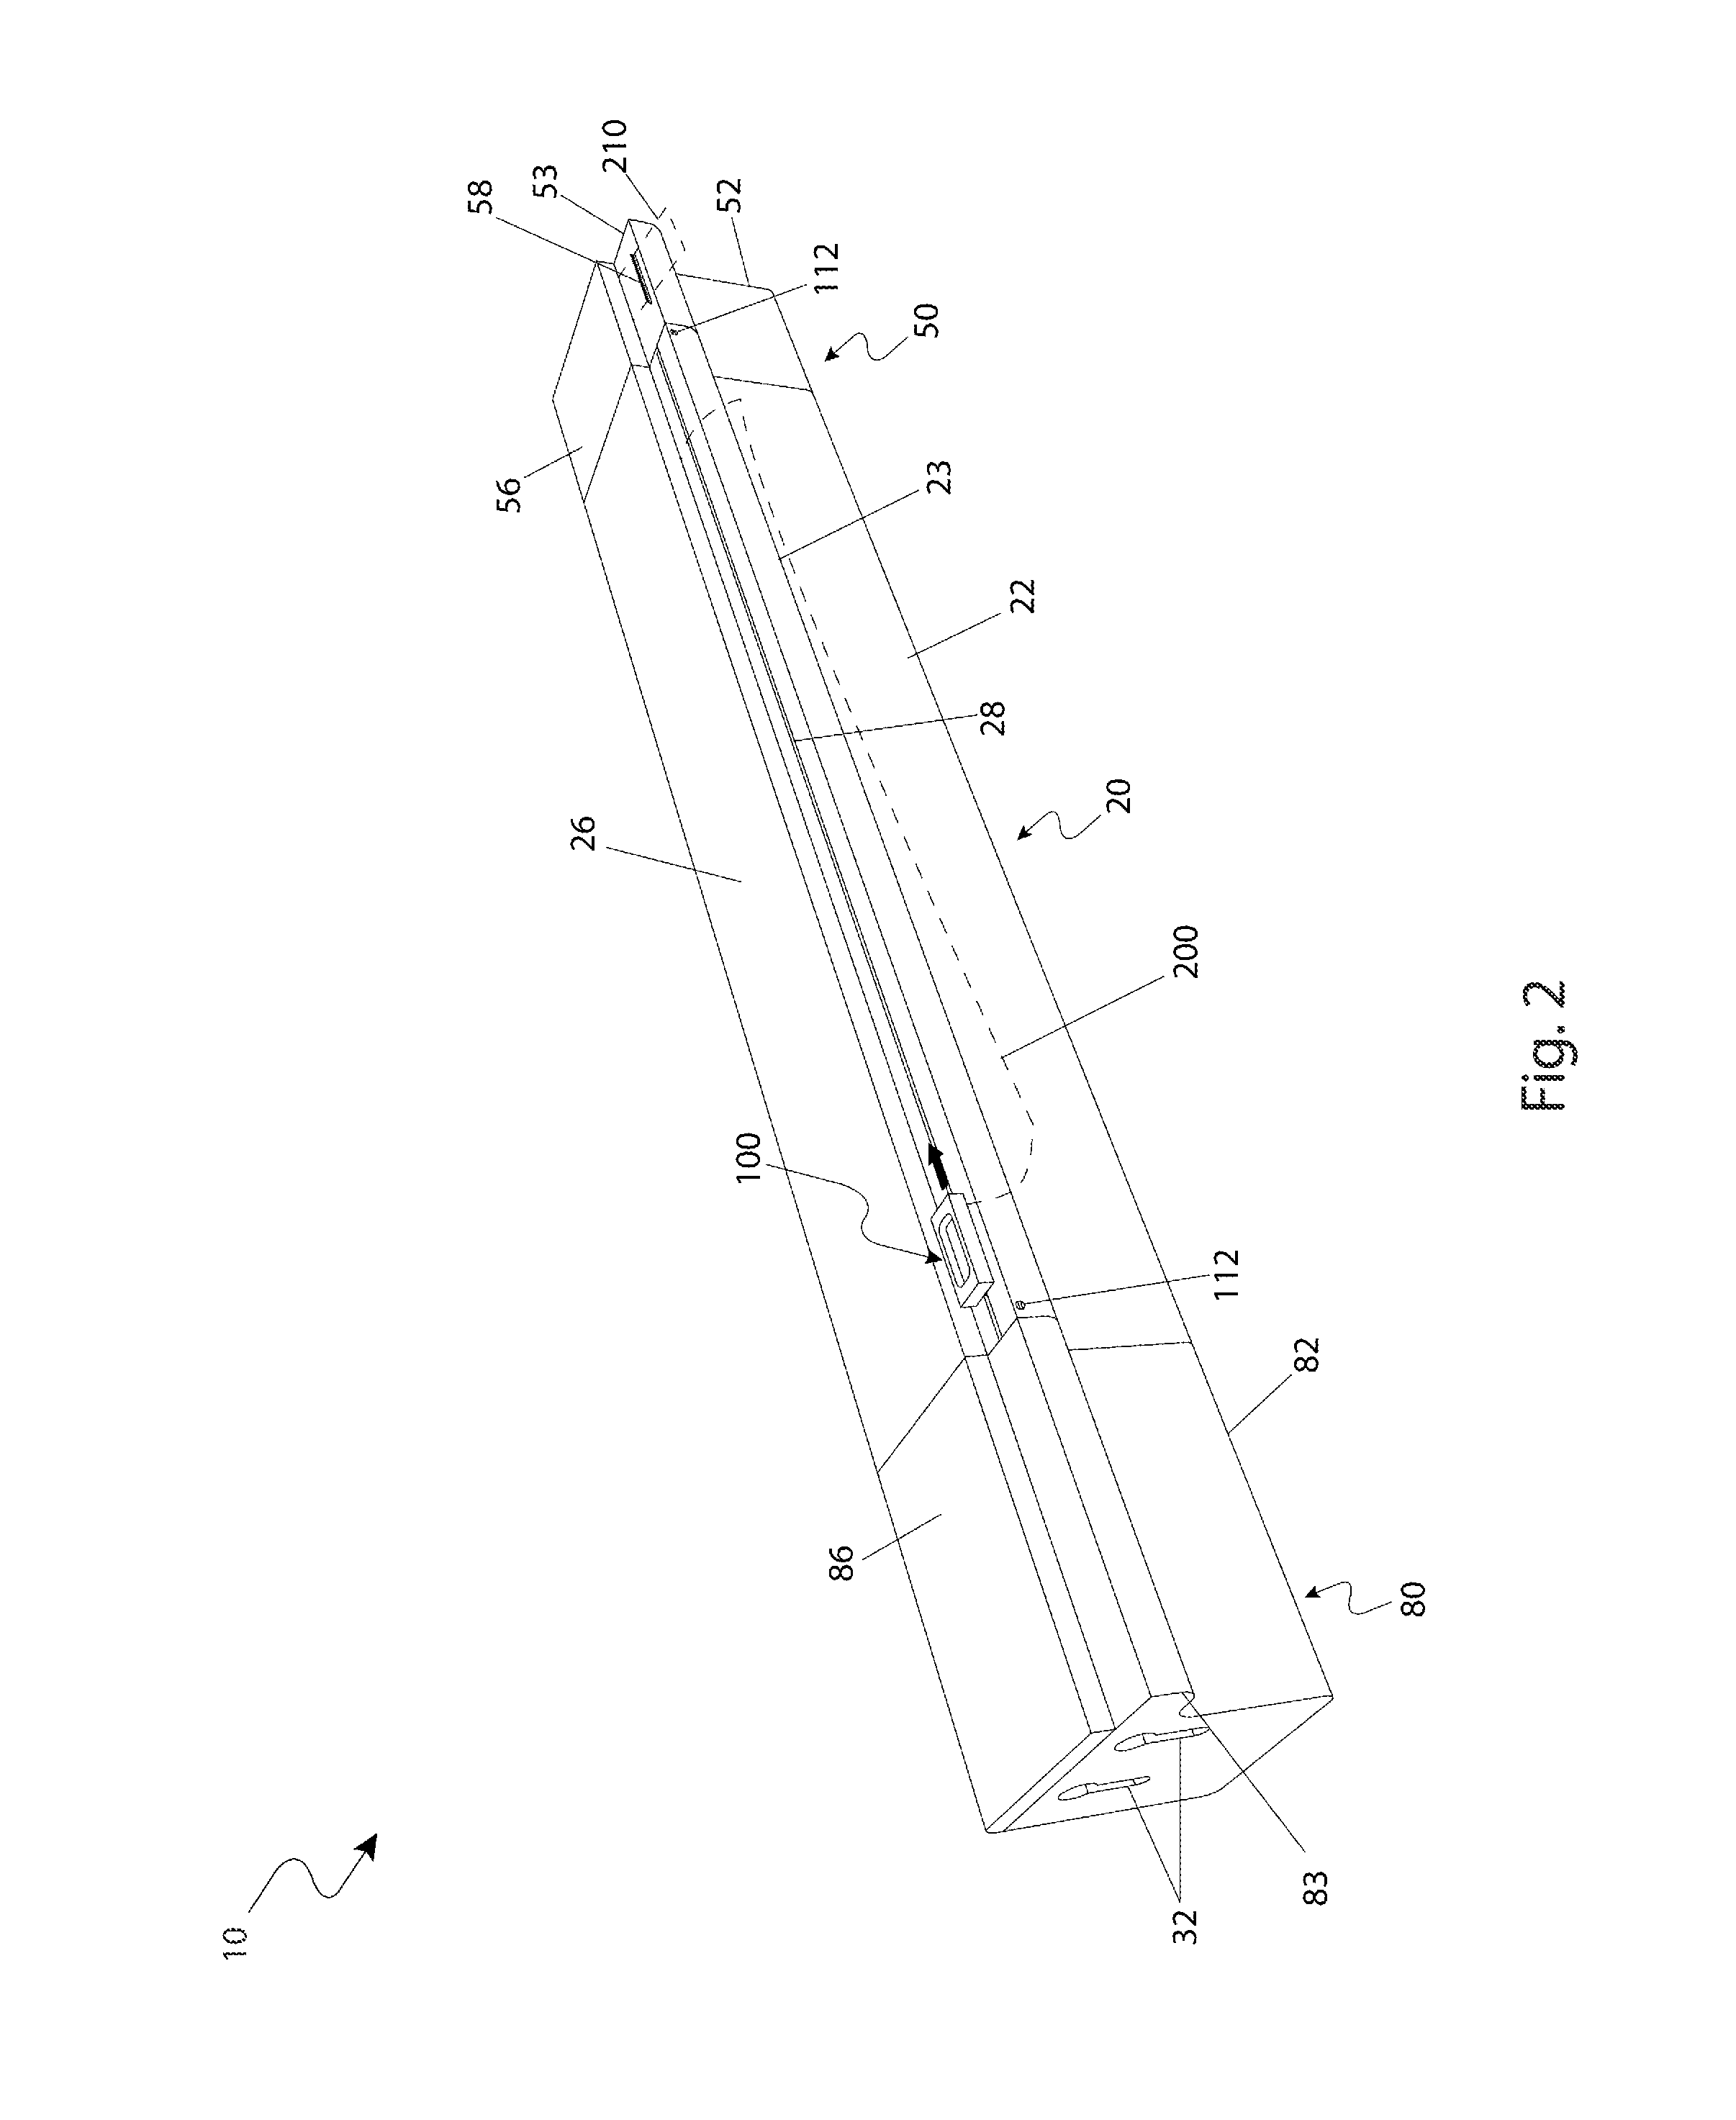 Storage and cutting apparatus for rolled sheet materials